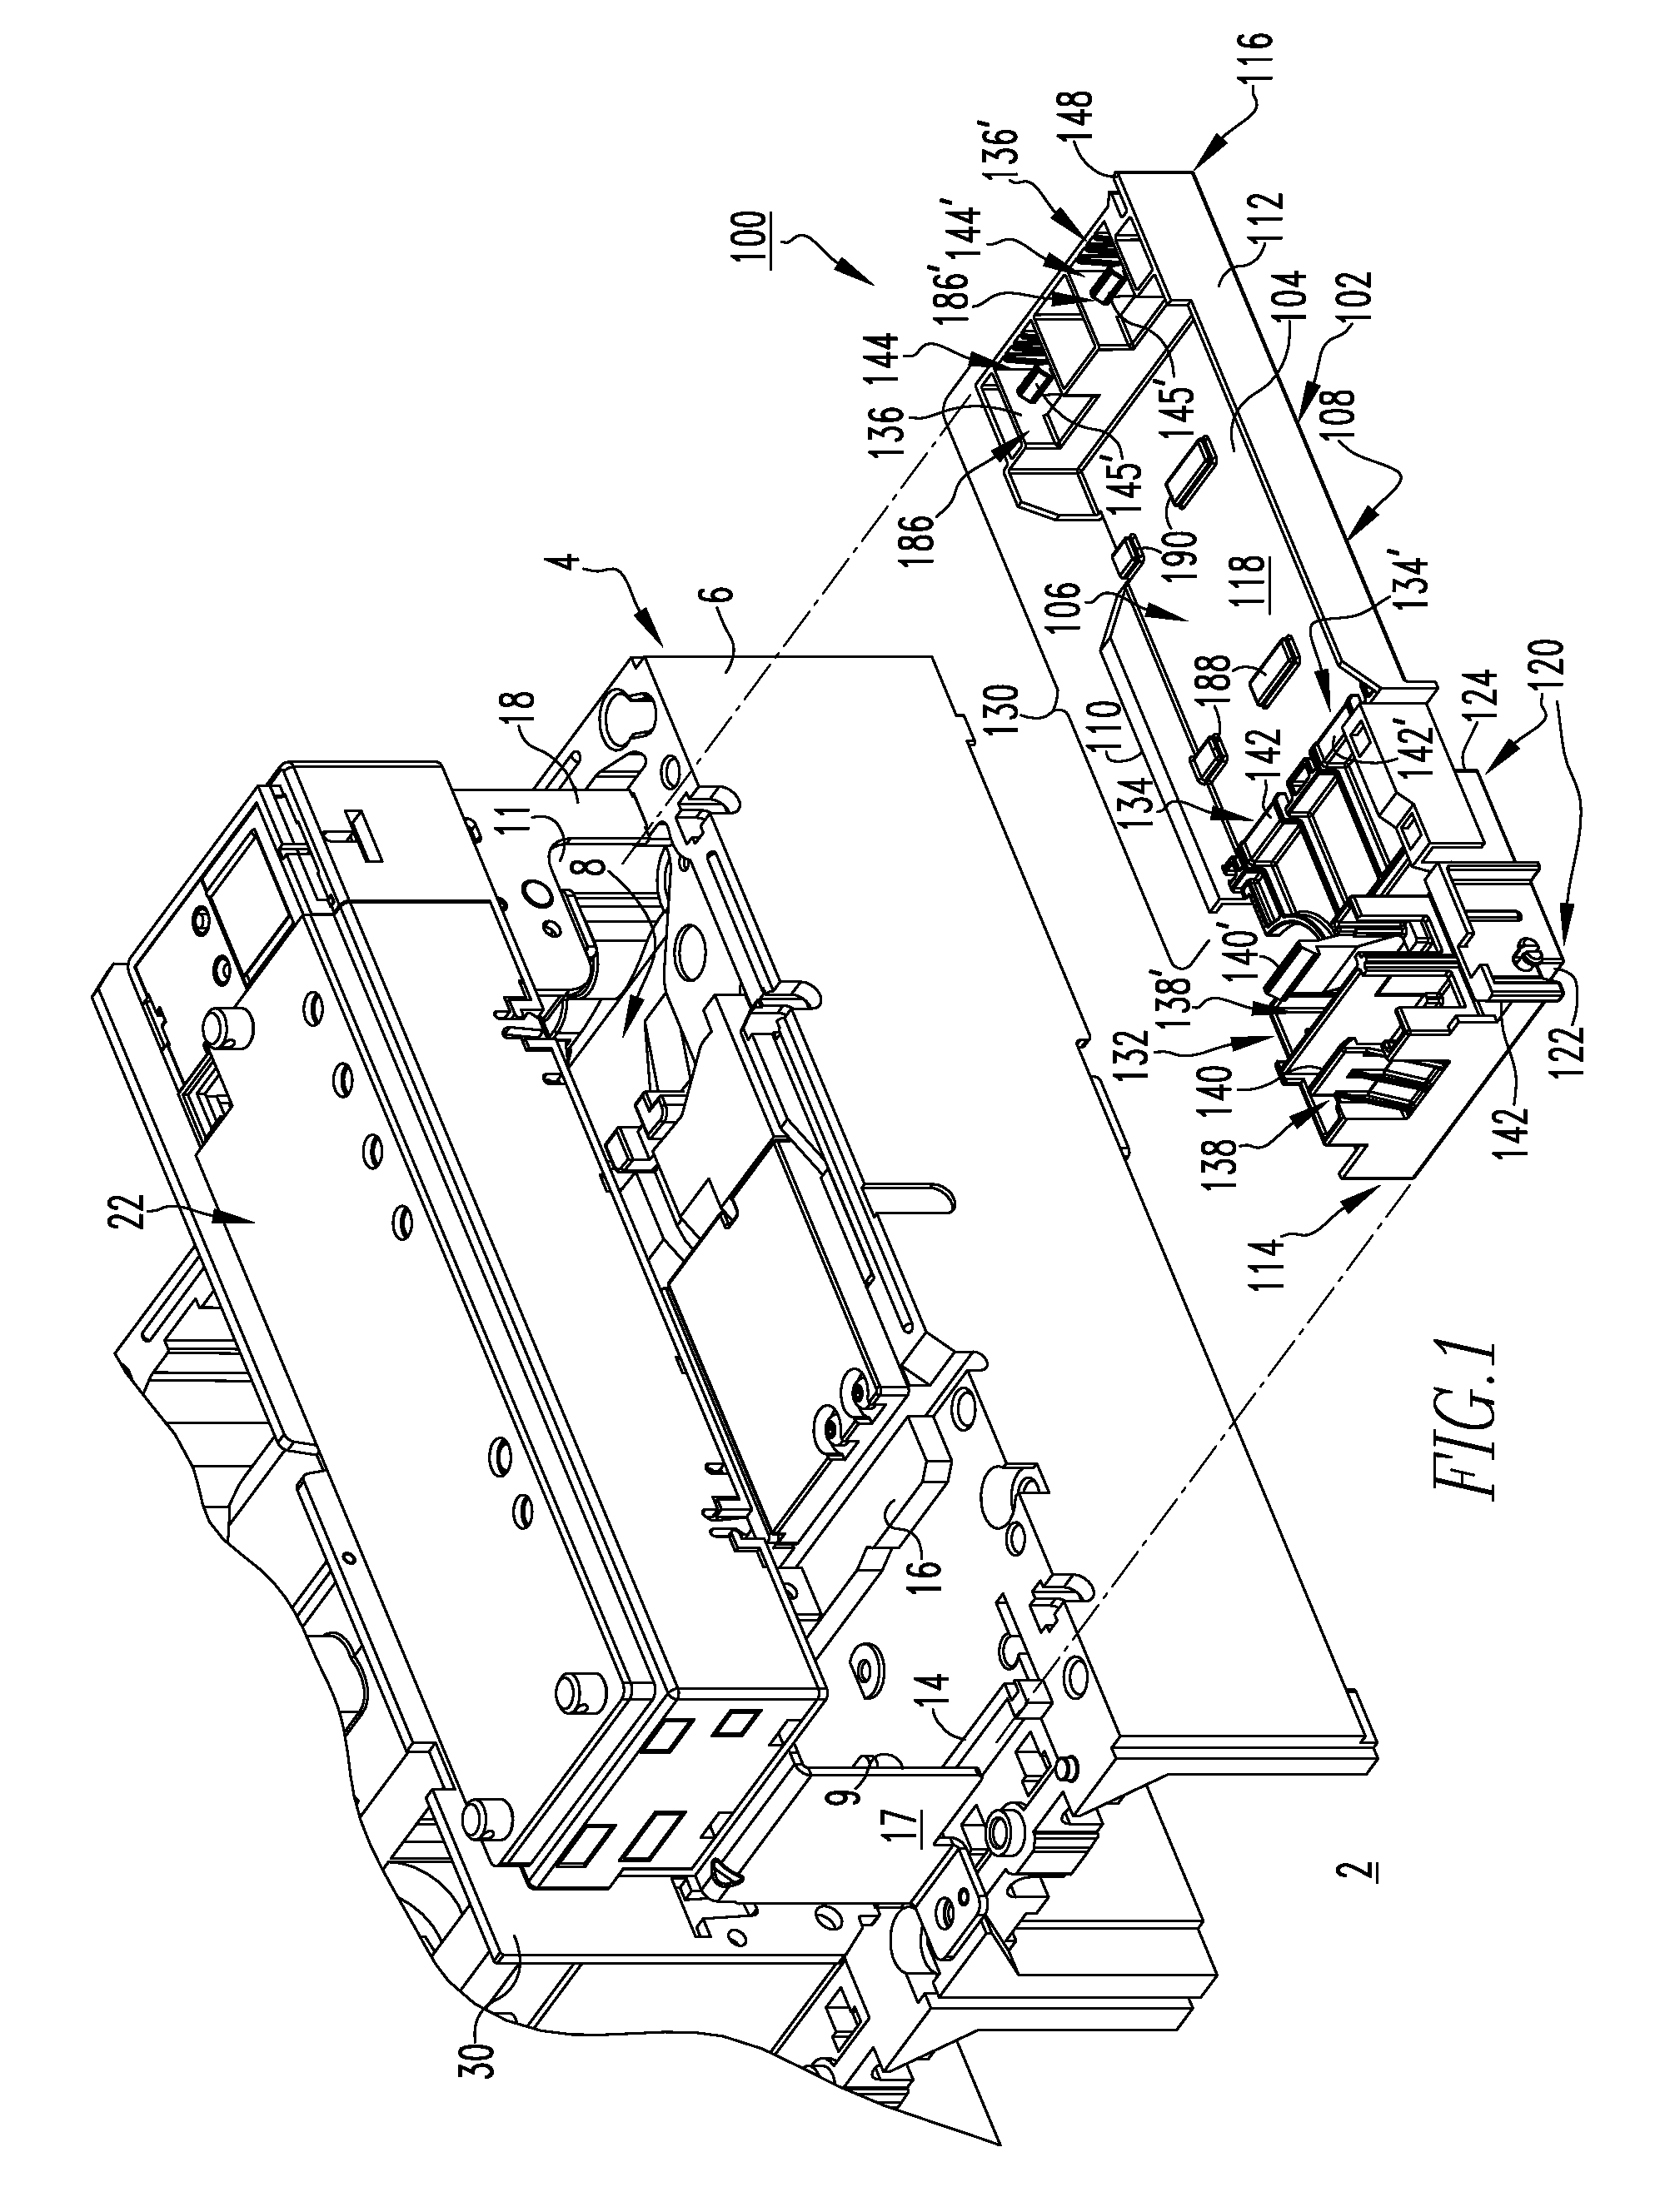 Electrical switching apparatus and trip bar therefor